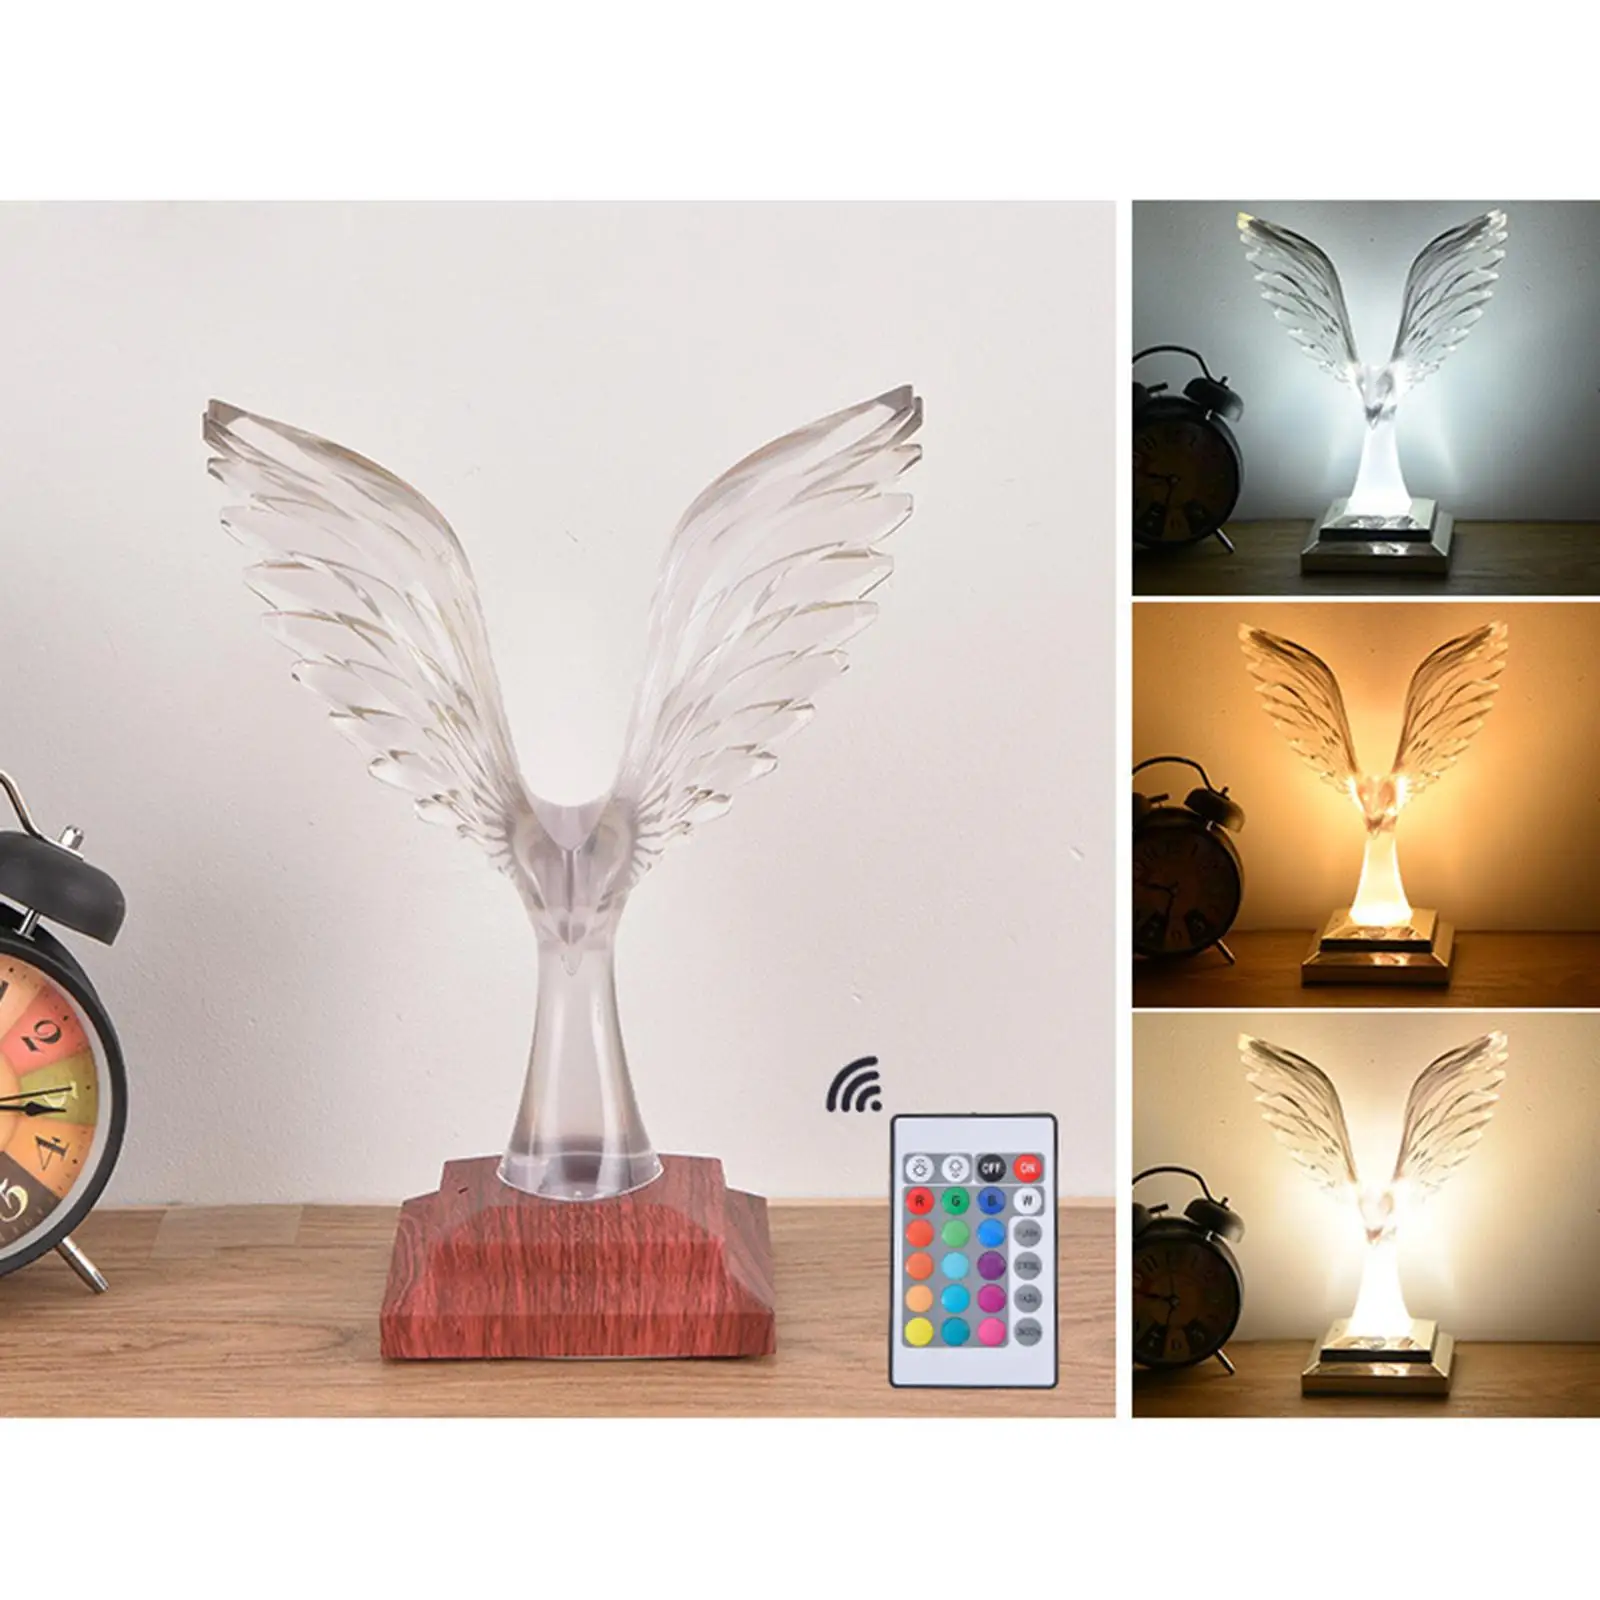 Modern Table Lamp RGB Atmosphere Light Touch Control USB Colorful Nightlight